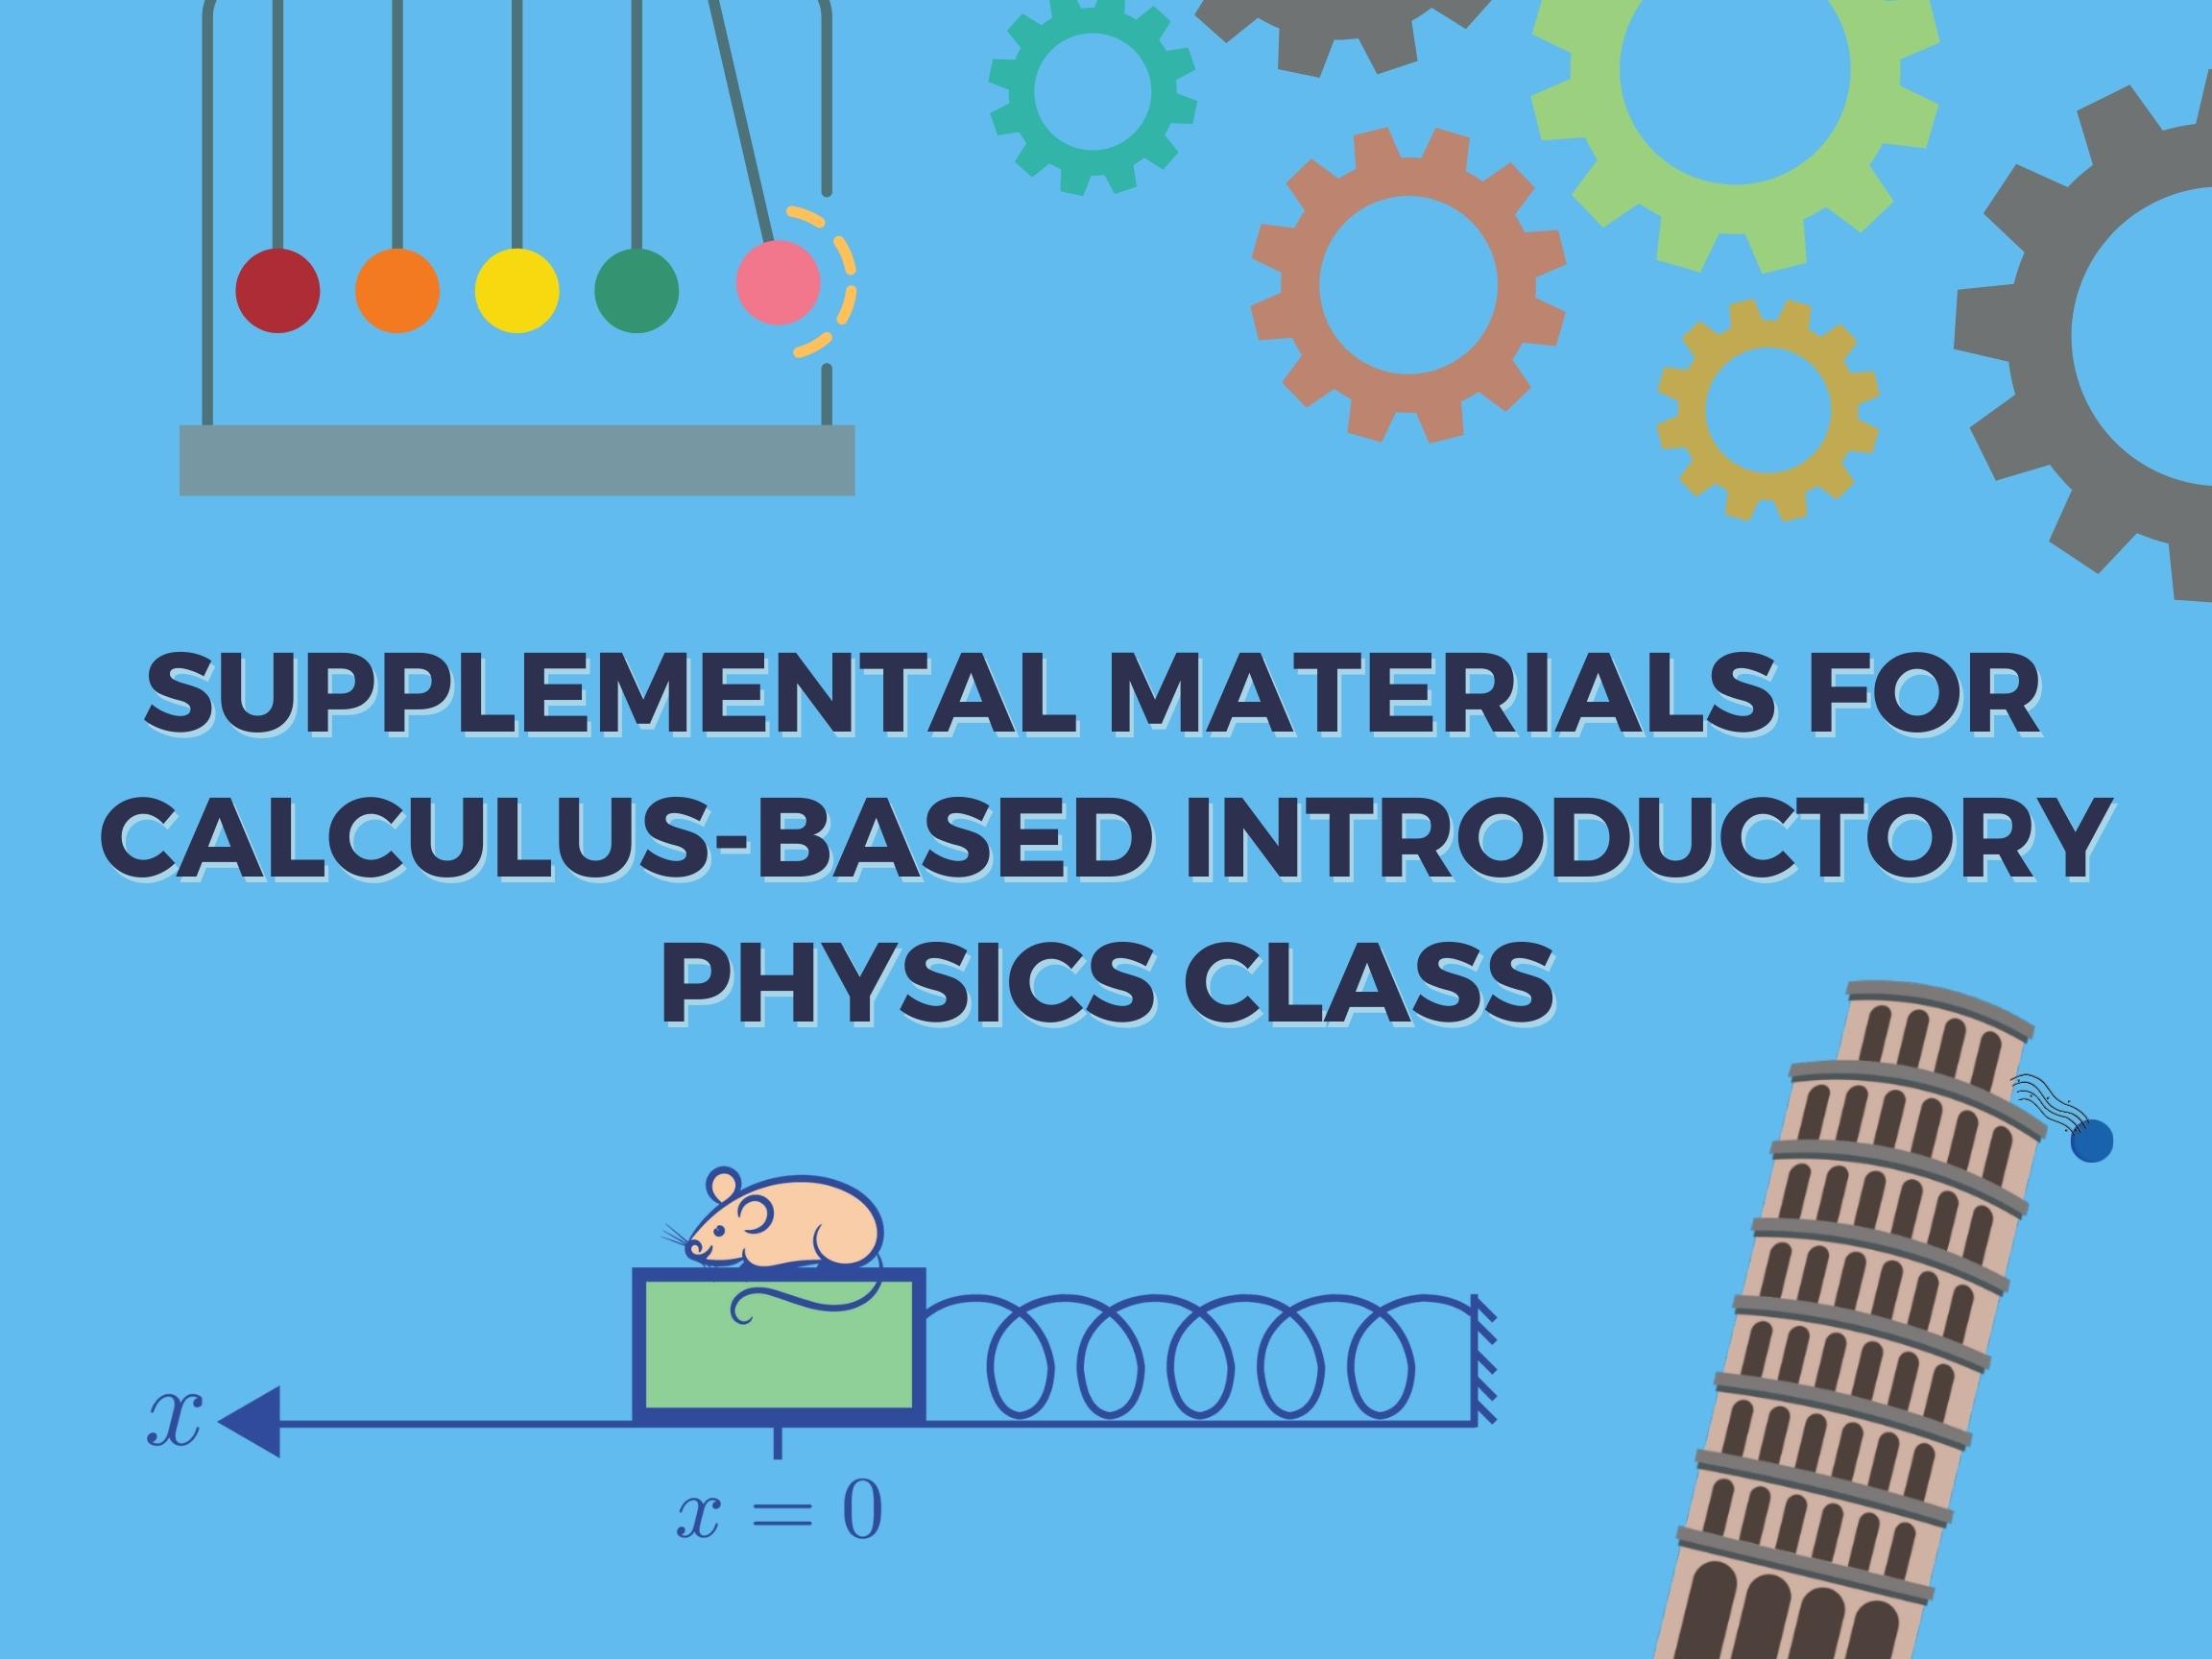 Supplemental Materials for Calculus-Based Introductory Physics Class